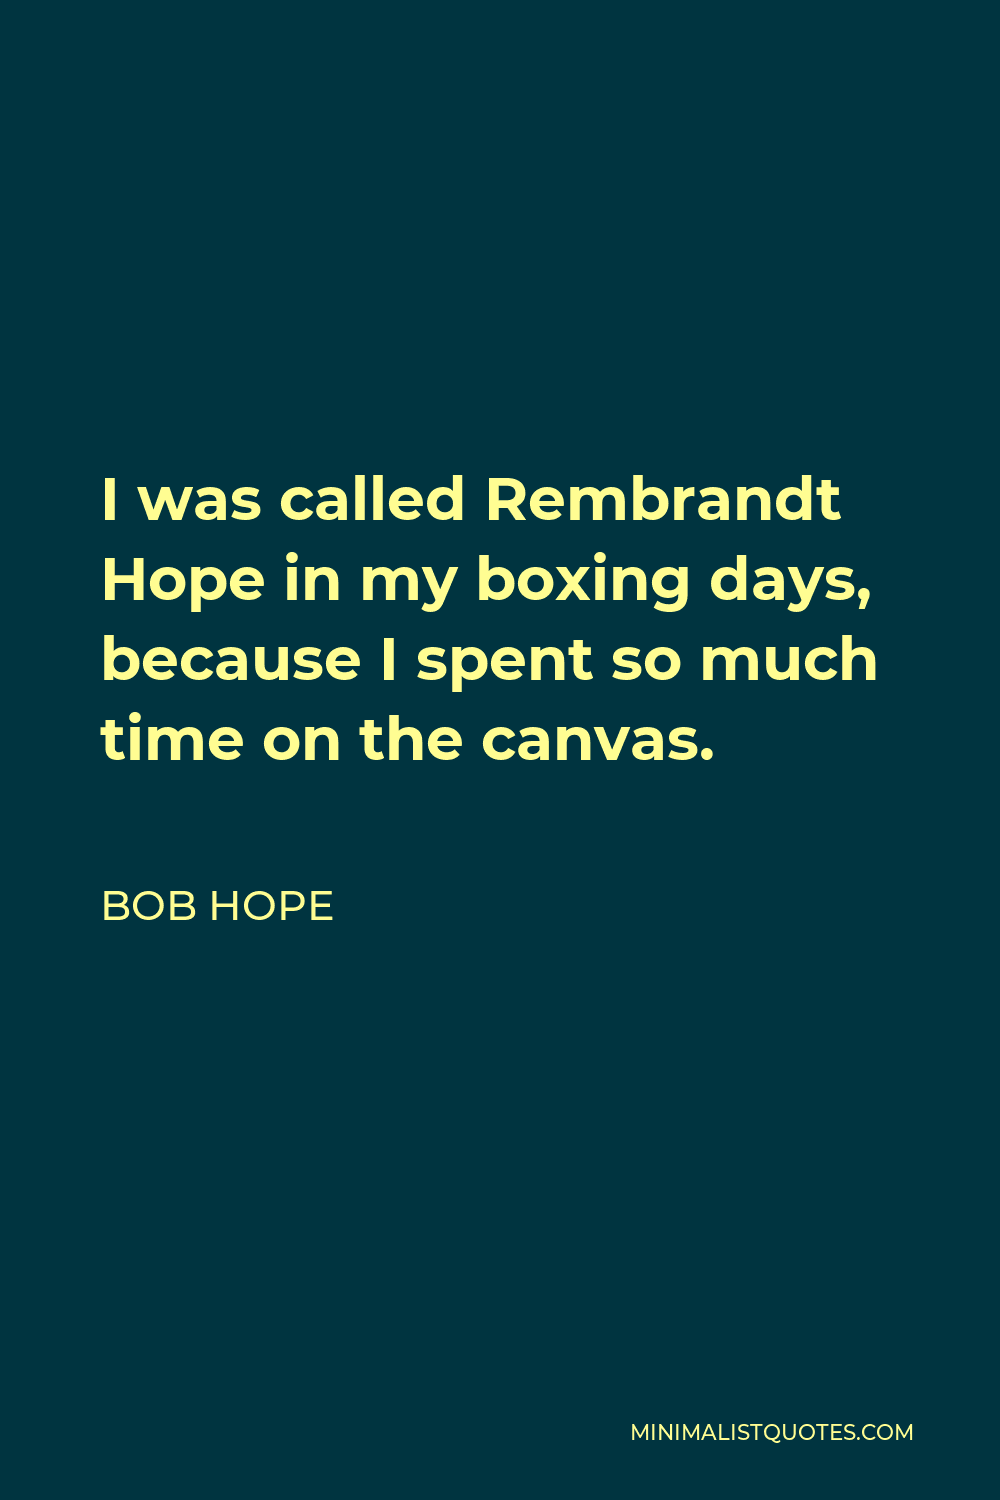 Bob Hope Quote - I was called Rembrandt Hope in my boxing days, because I spent so much time on the canvas.